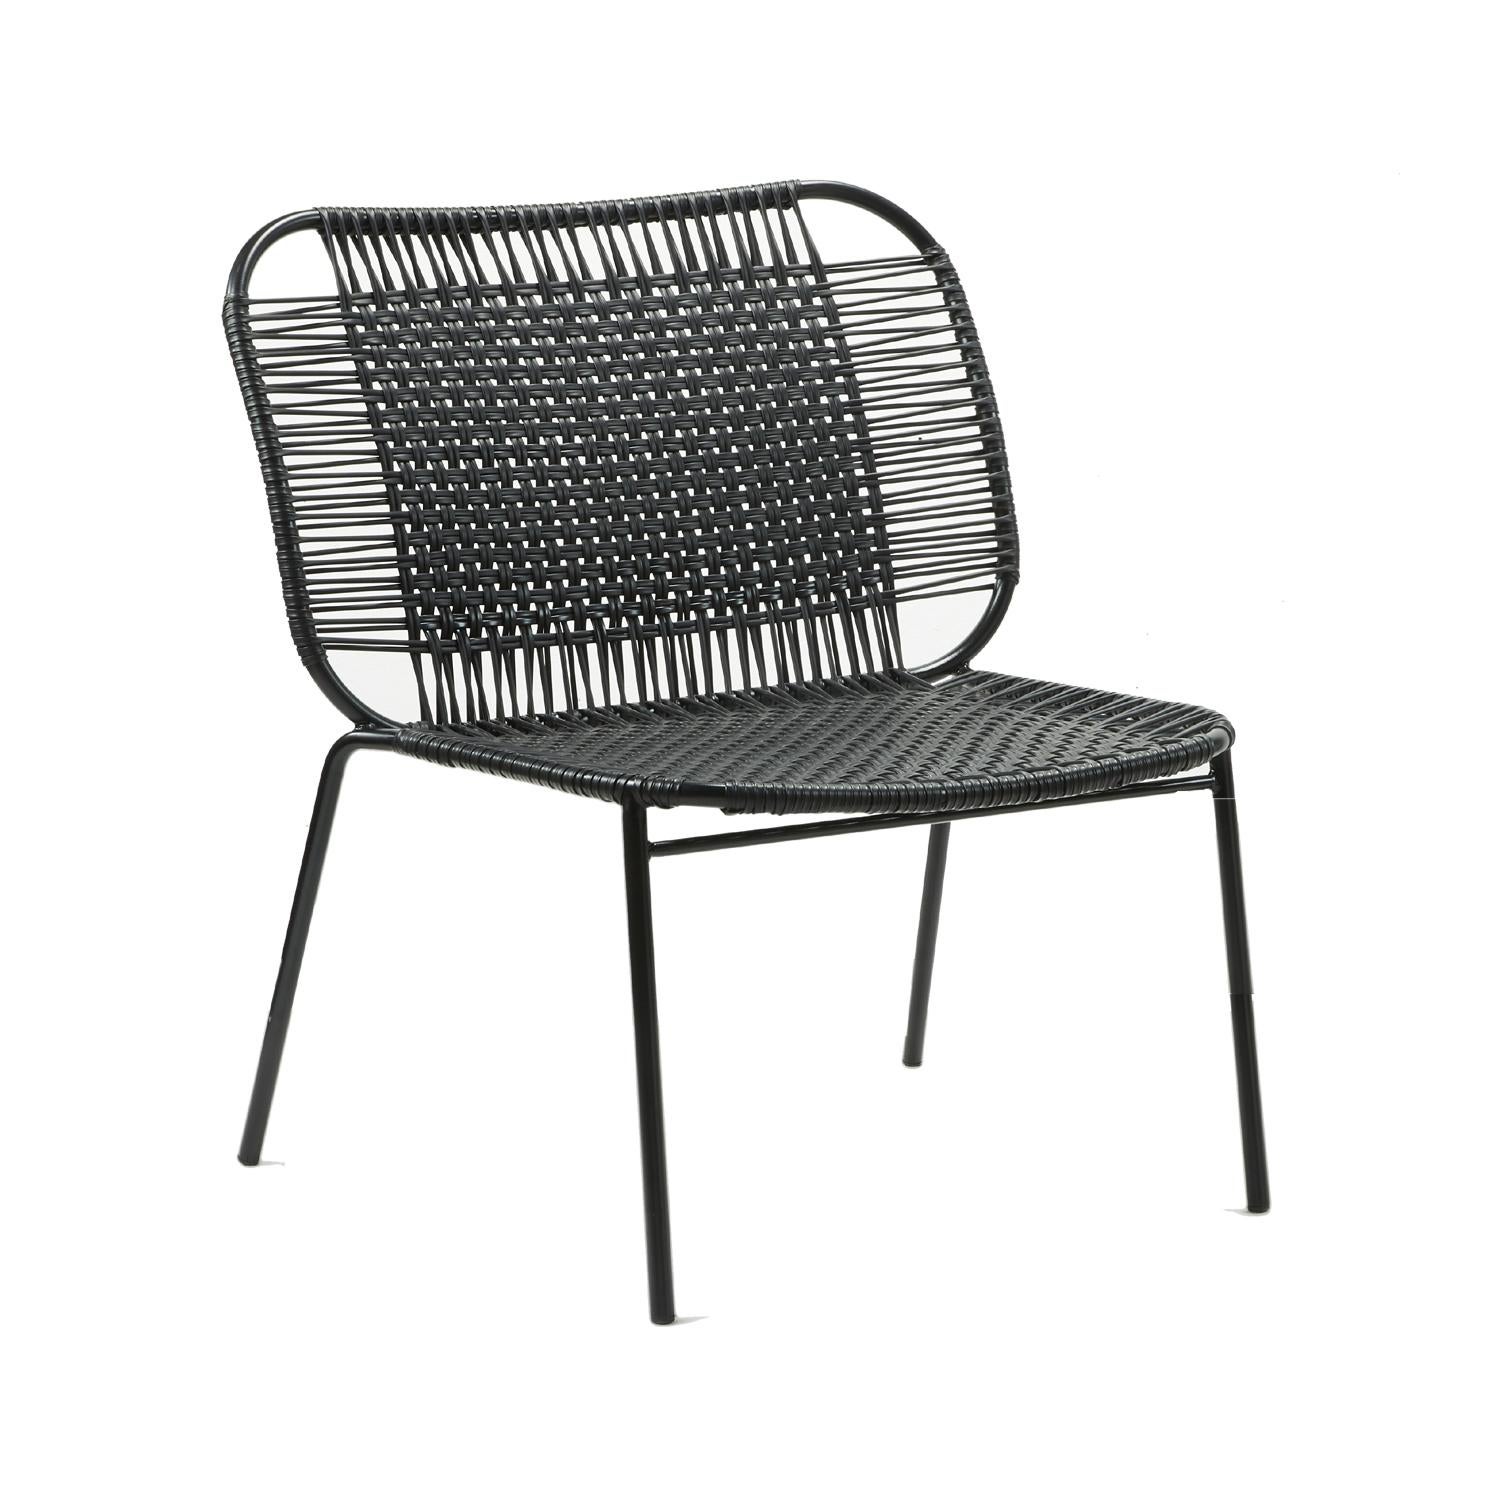 Set of 4 black Cielo lounge low chair by Sebastian Herkner
Materials: Galvanized and powder-coated tubular steel. PVC strings are made from recycled plastic.
Technique: Made from recycled plastic and weaved by local craftspeople in Cartagena,